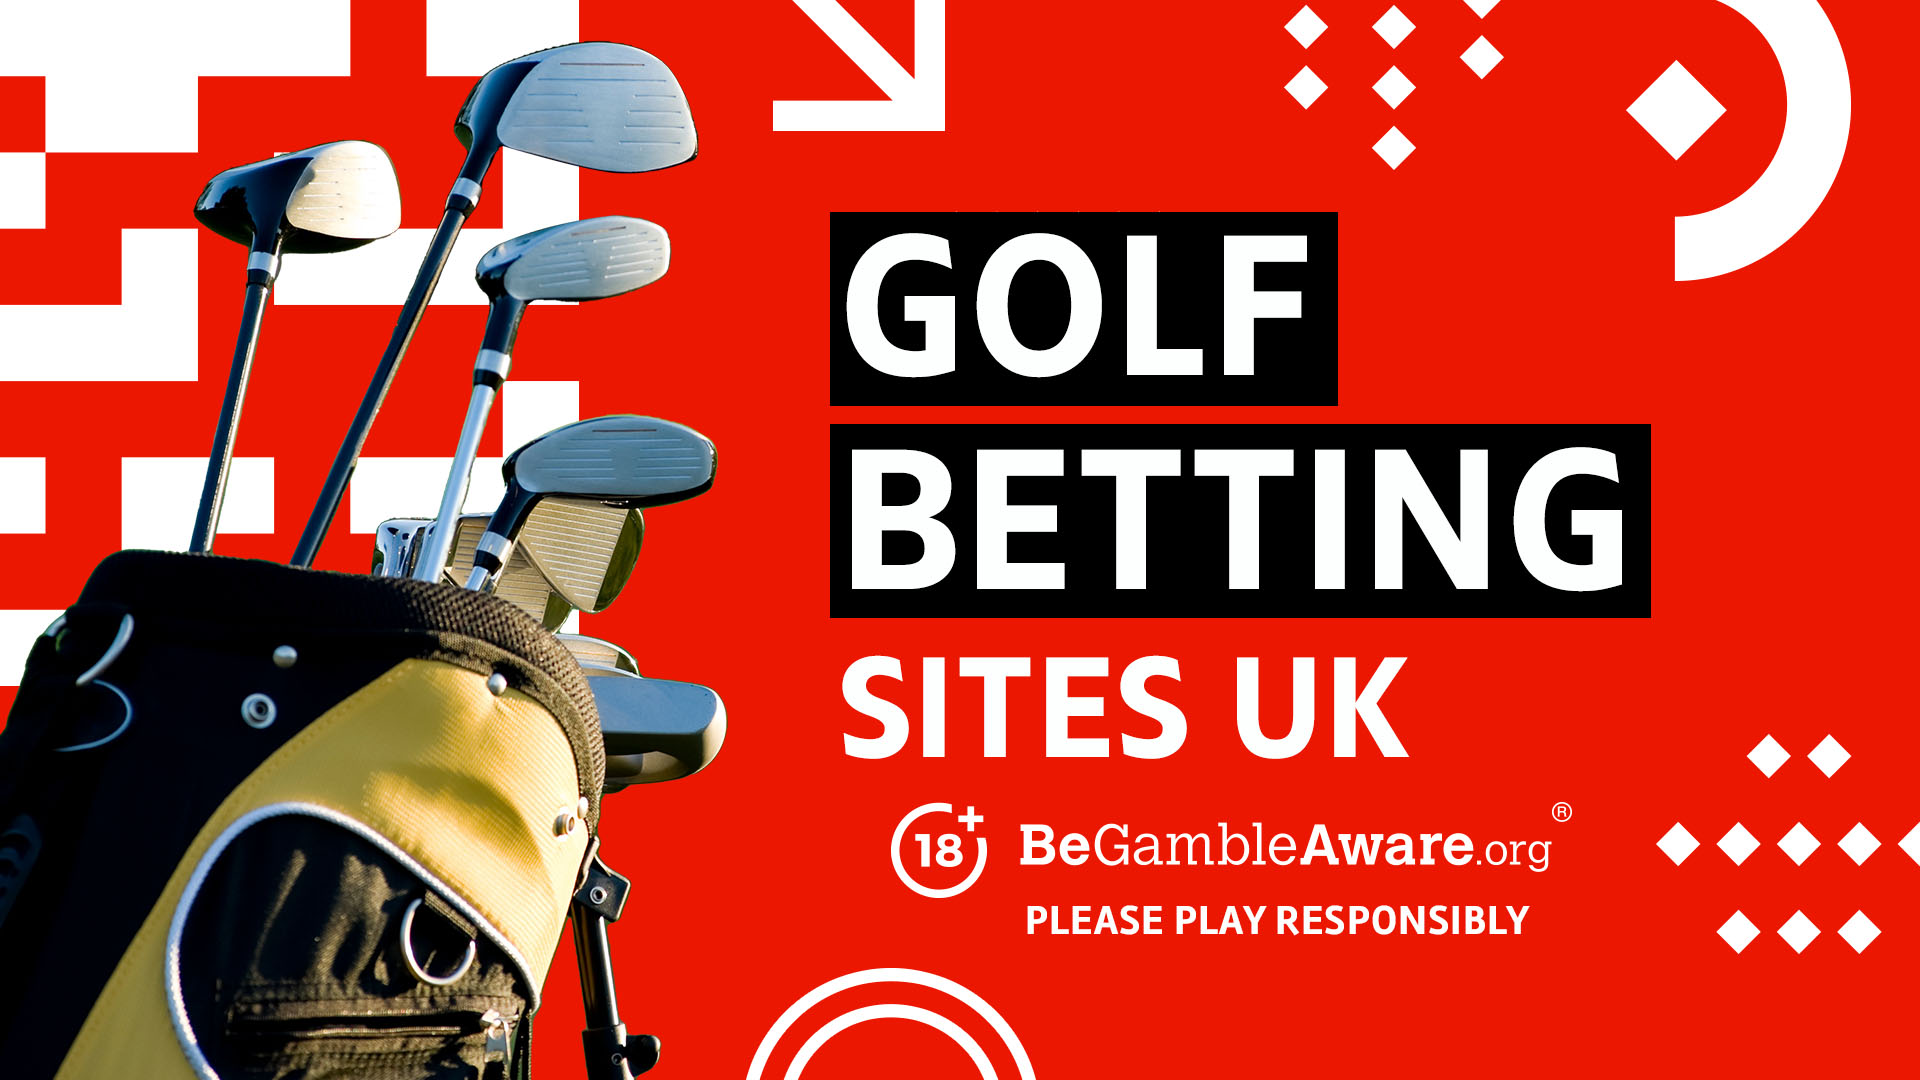 Photo: golf betting promotions